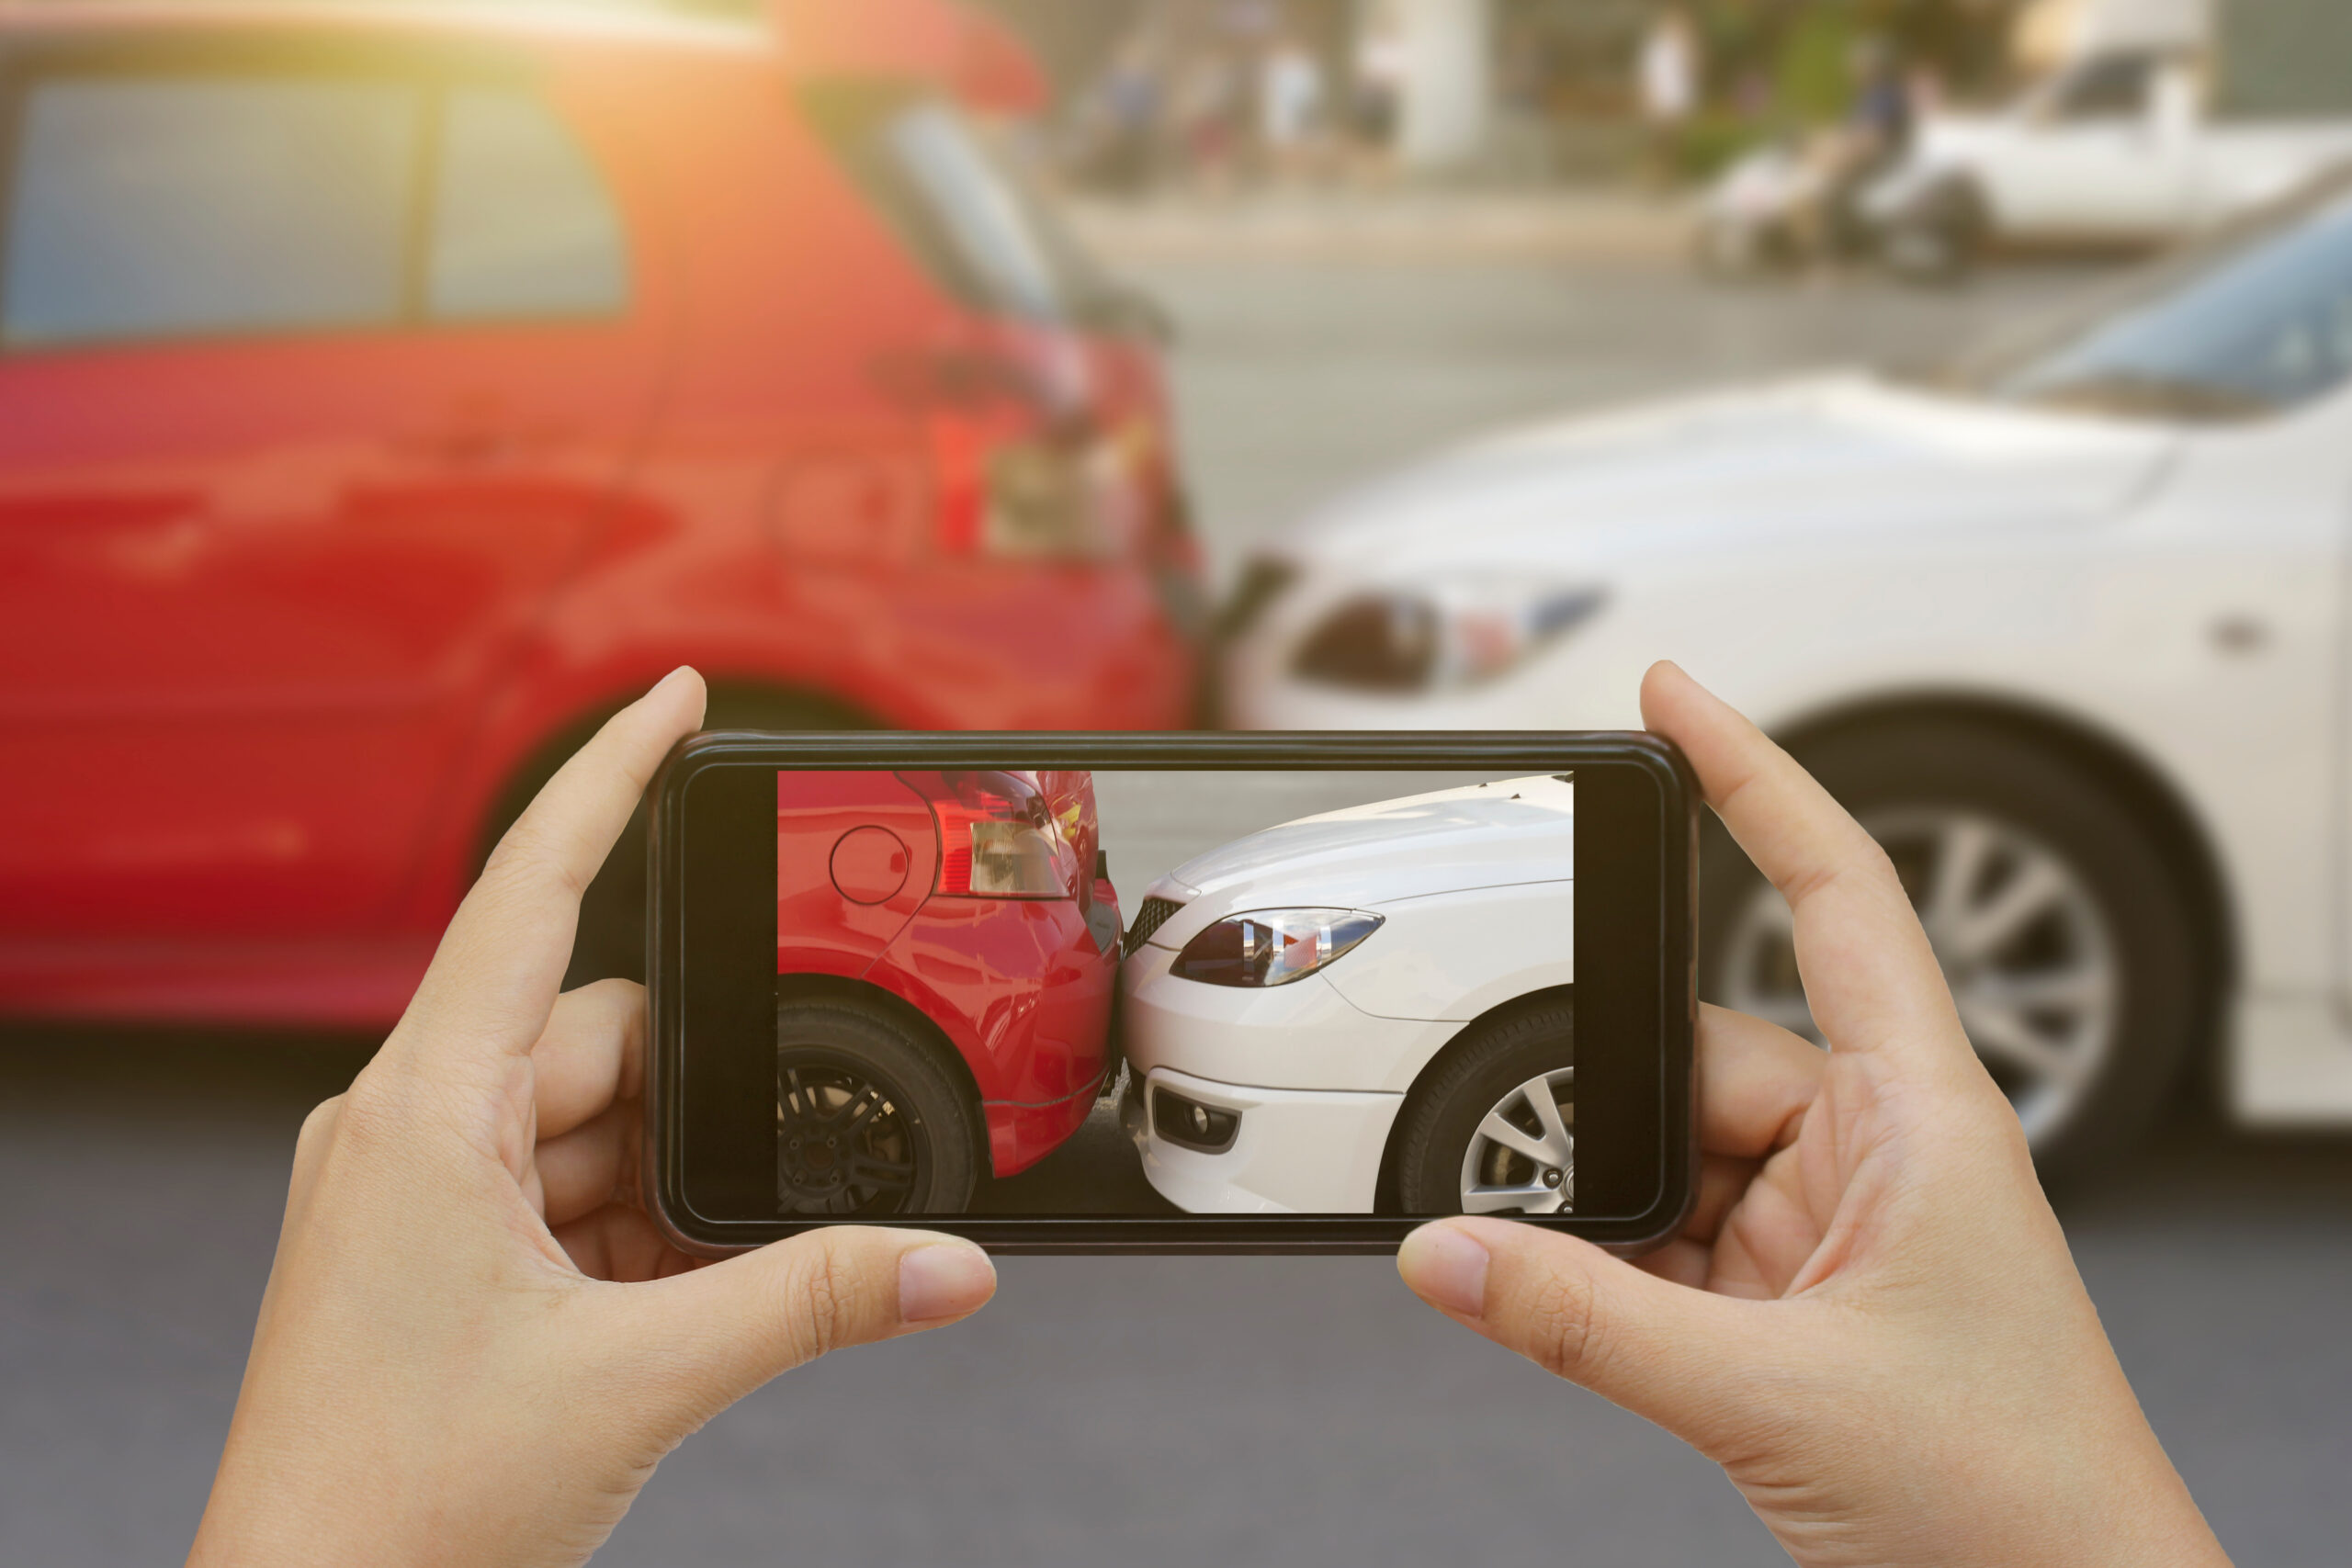 Close up of hands holding smartphone and taking a photo at the scene of a car crash accident